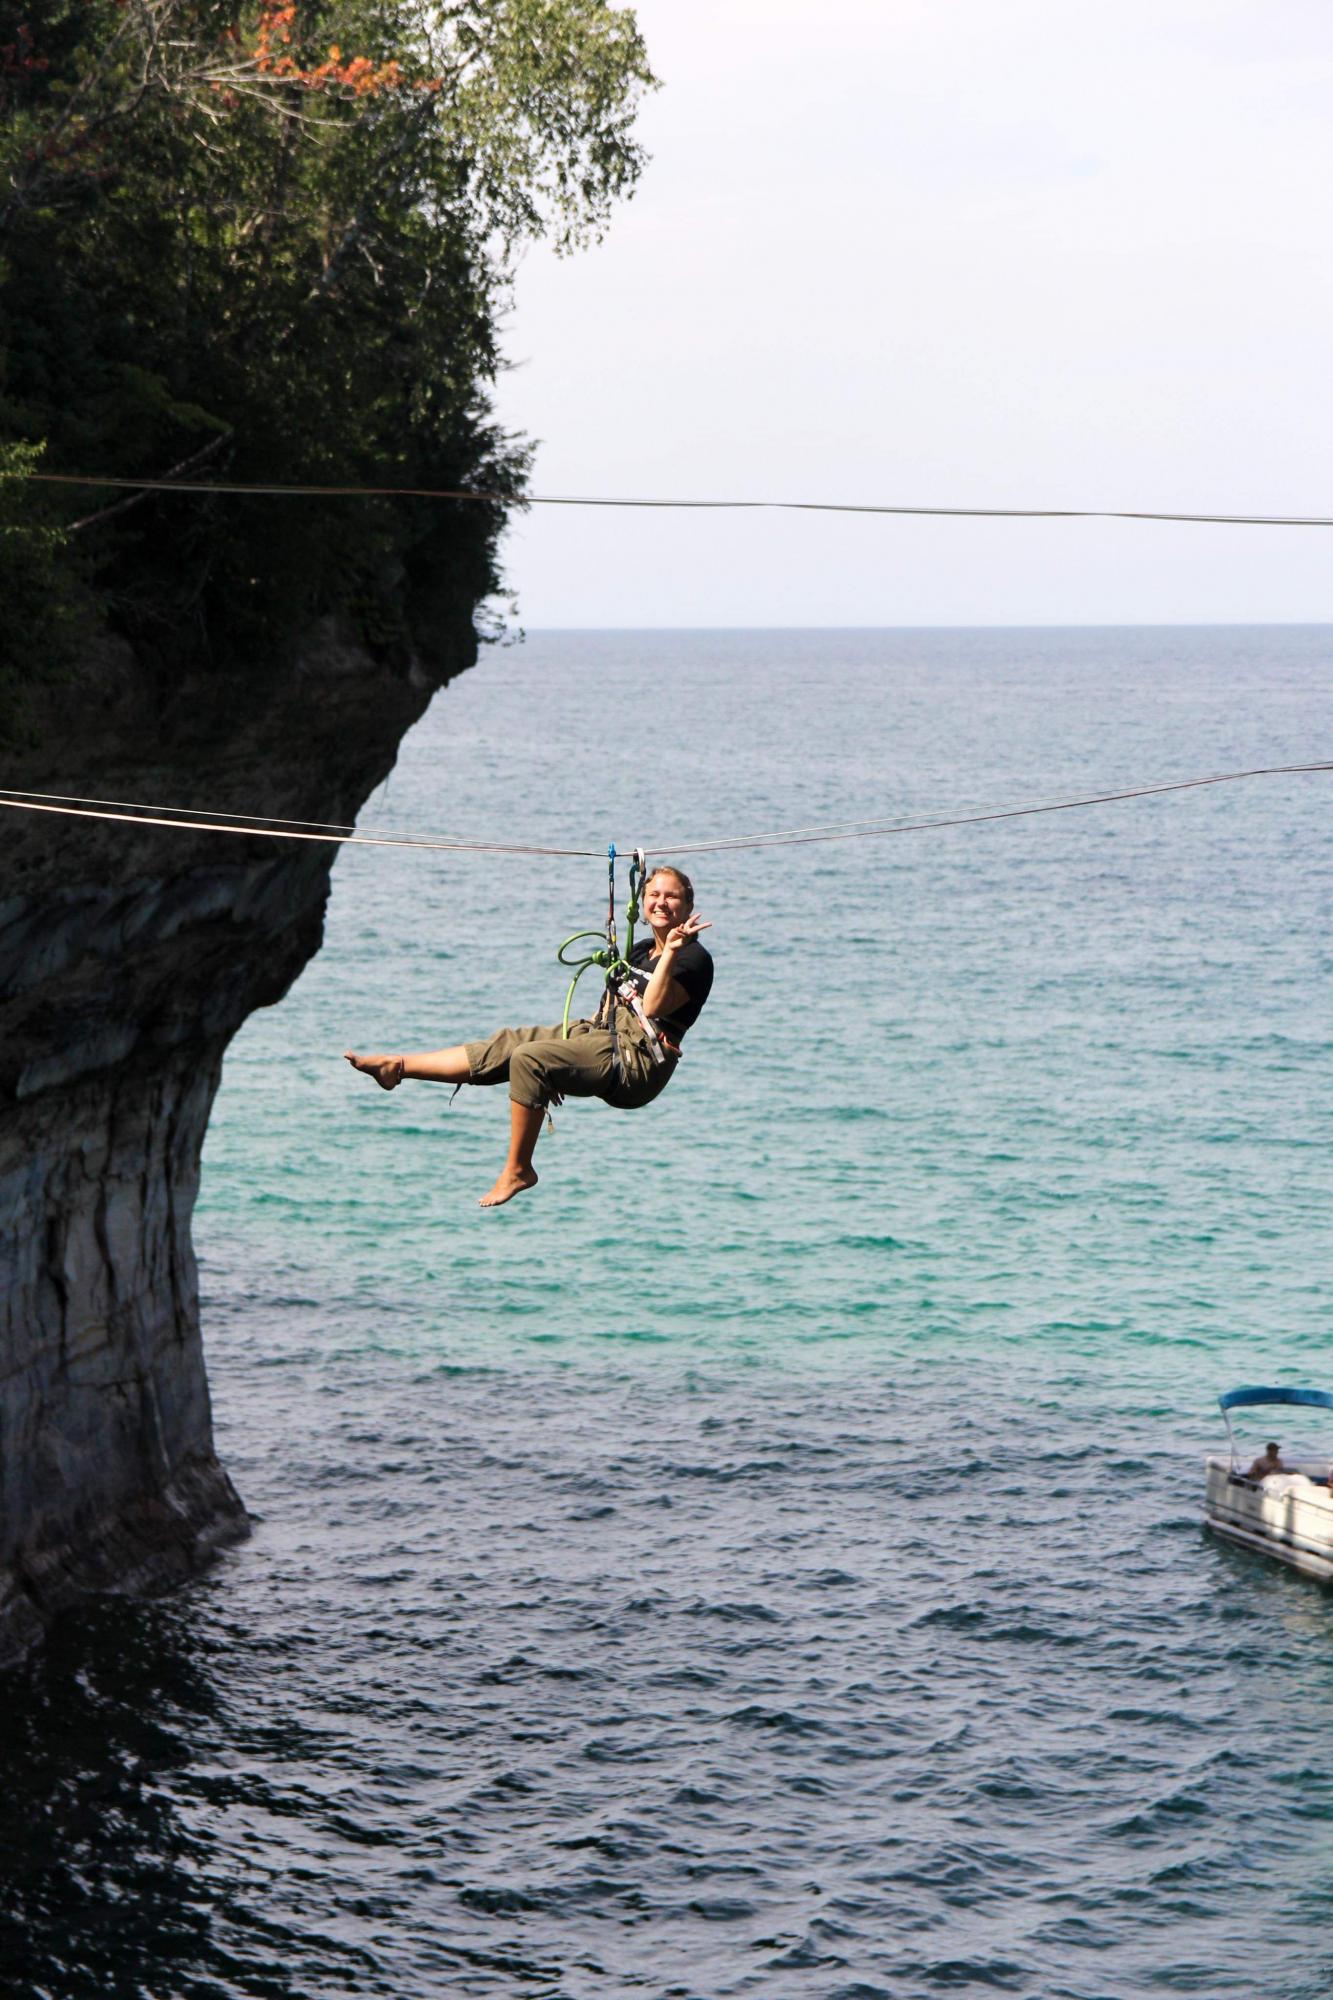 Zoe hanging on slack line over the water